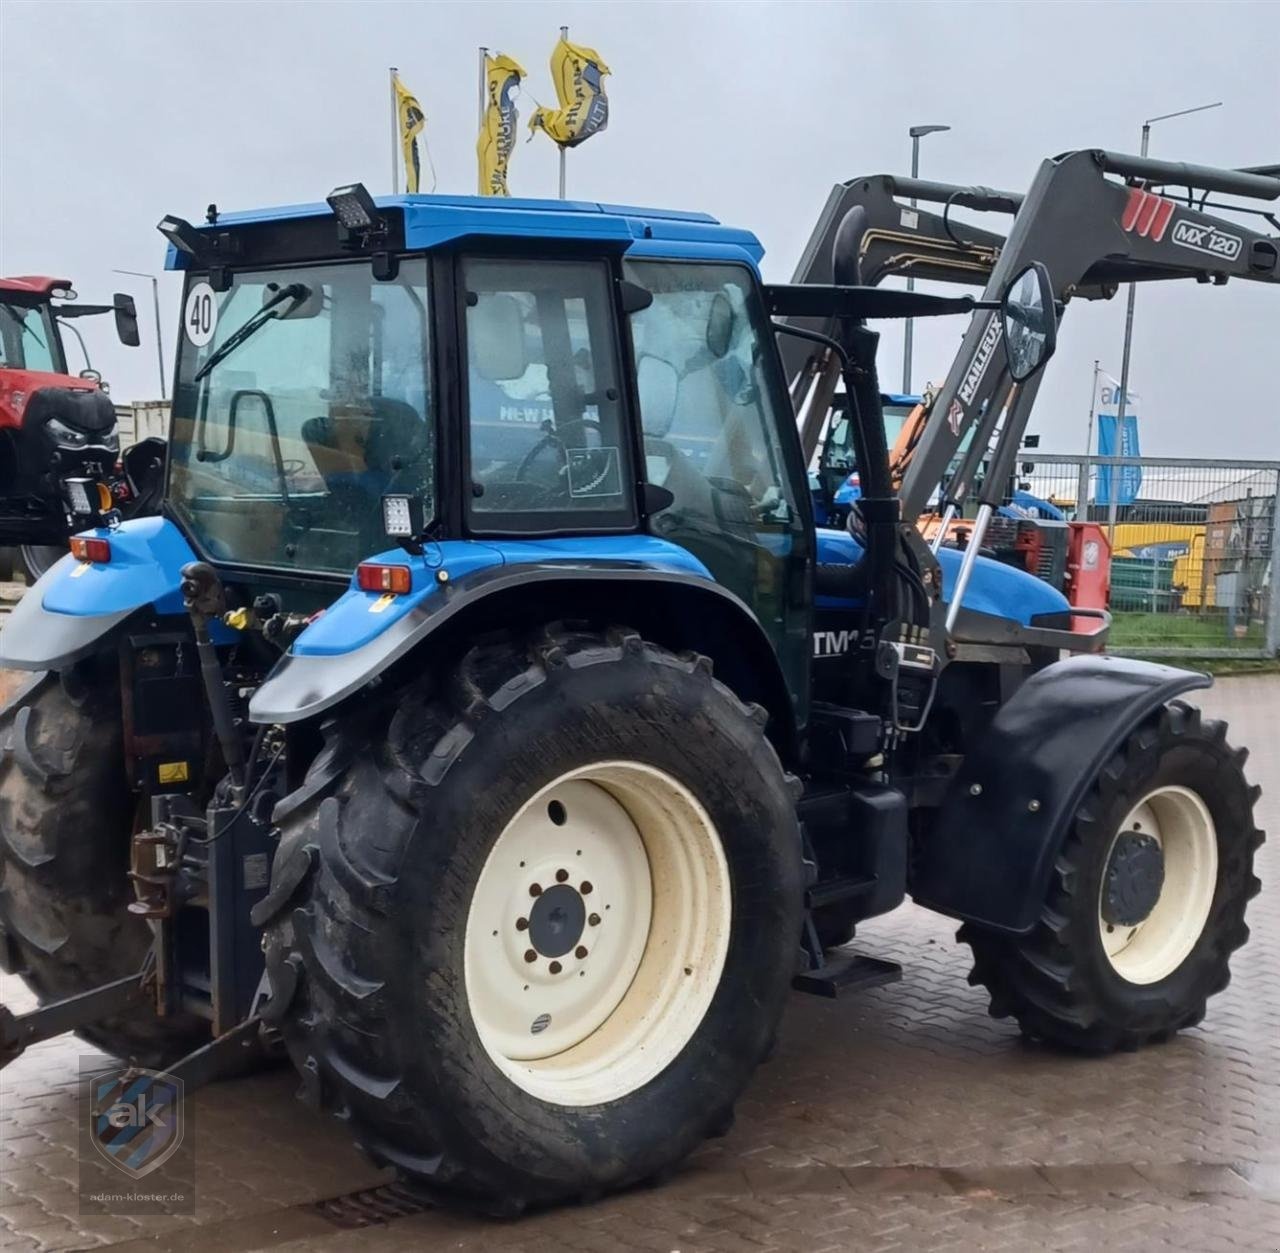 New Holland TM 150 tractor 35 000 €